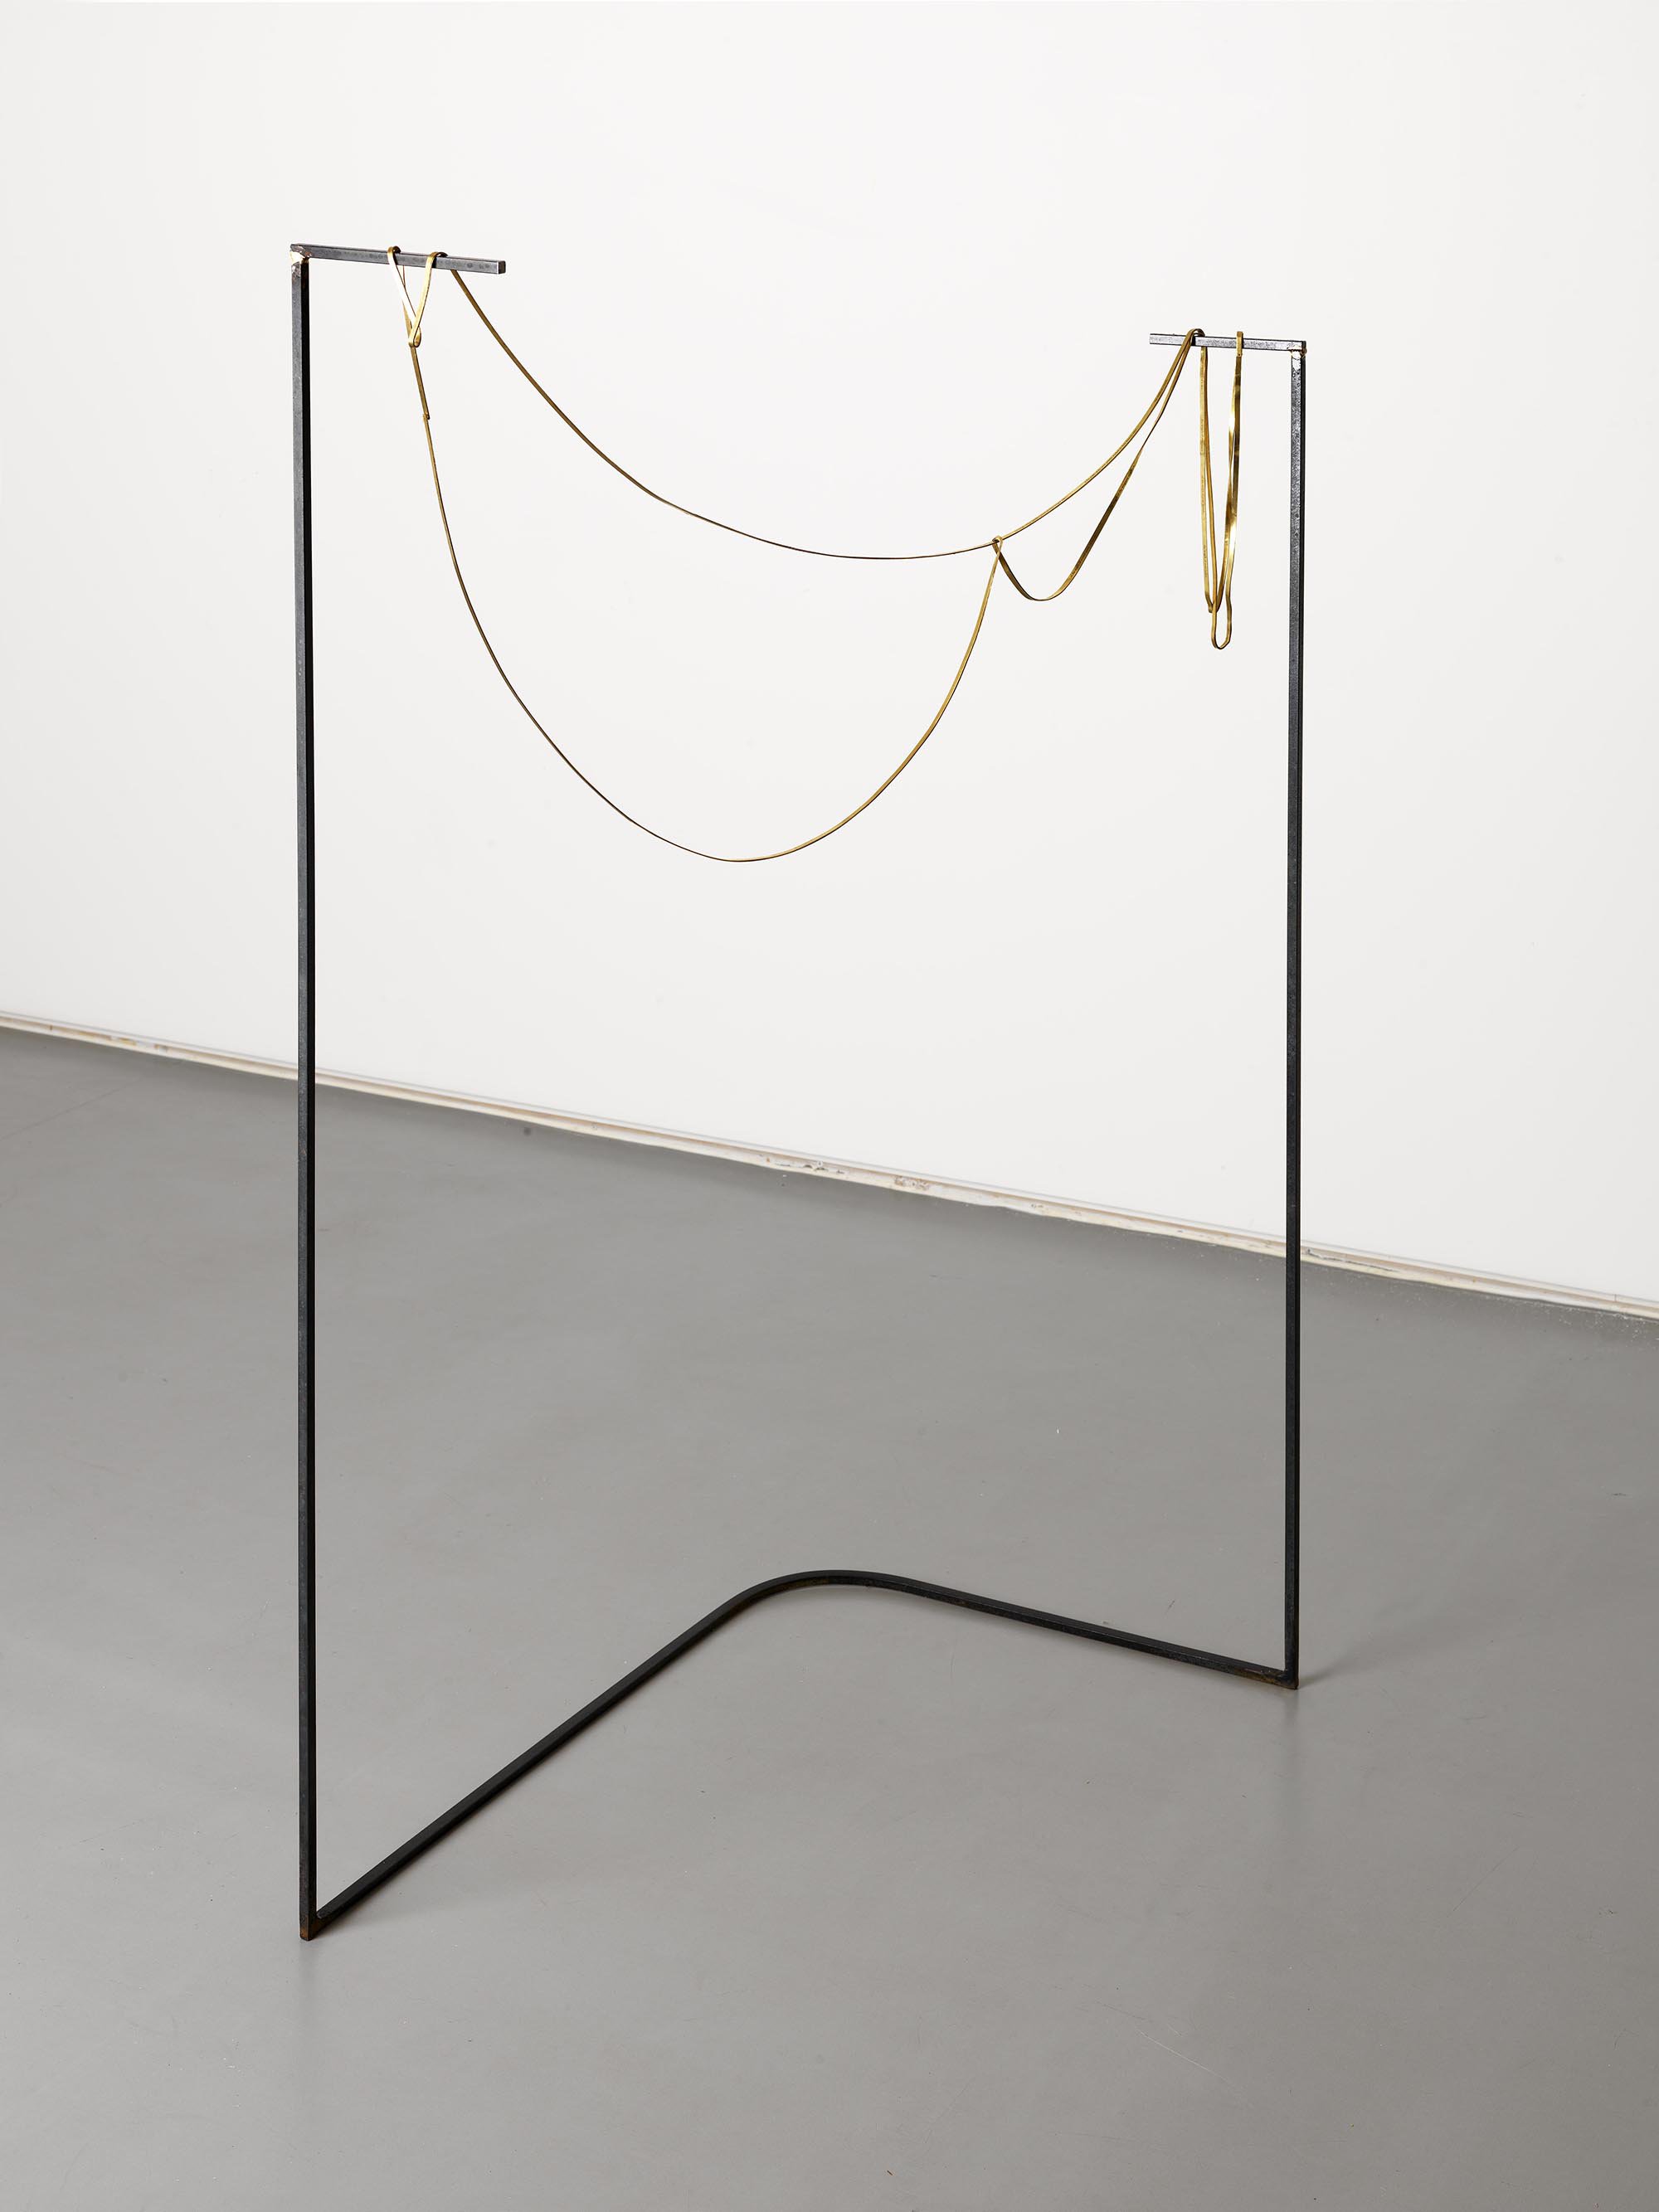 Athanasios Argianas, Song Machine, photo-etched brass strip of the length of the artist’s height, mild steel, walnut, 100 x 160 cm (39 3/8 x 63 in), 2010. Installation view, Odd Time Beat, Rodeo, Istanbul, 2011